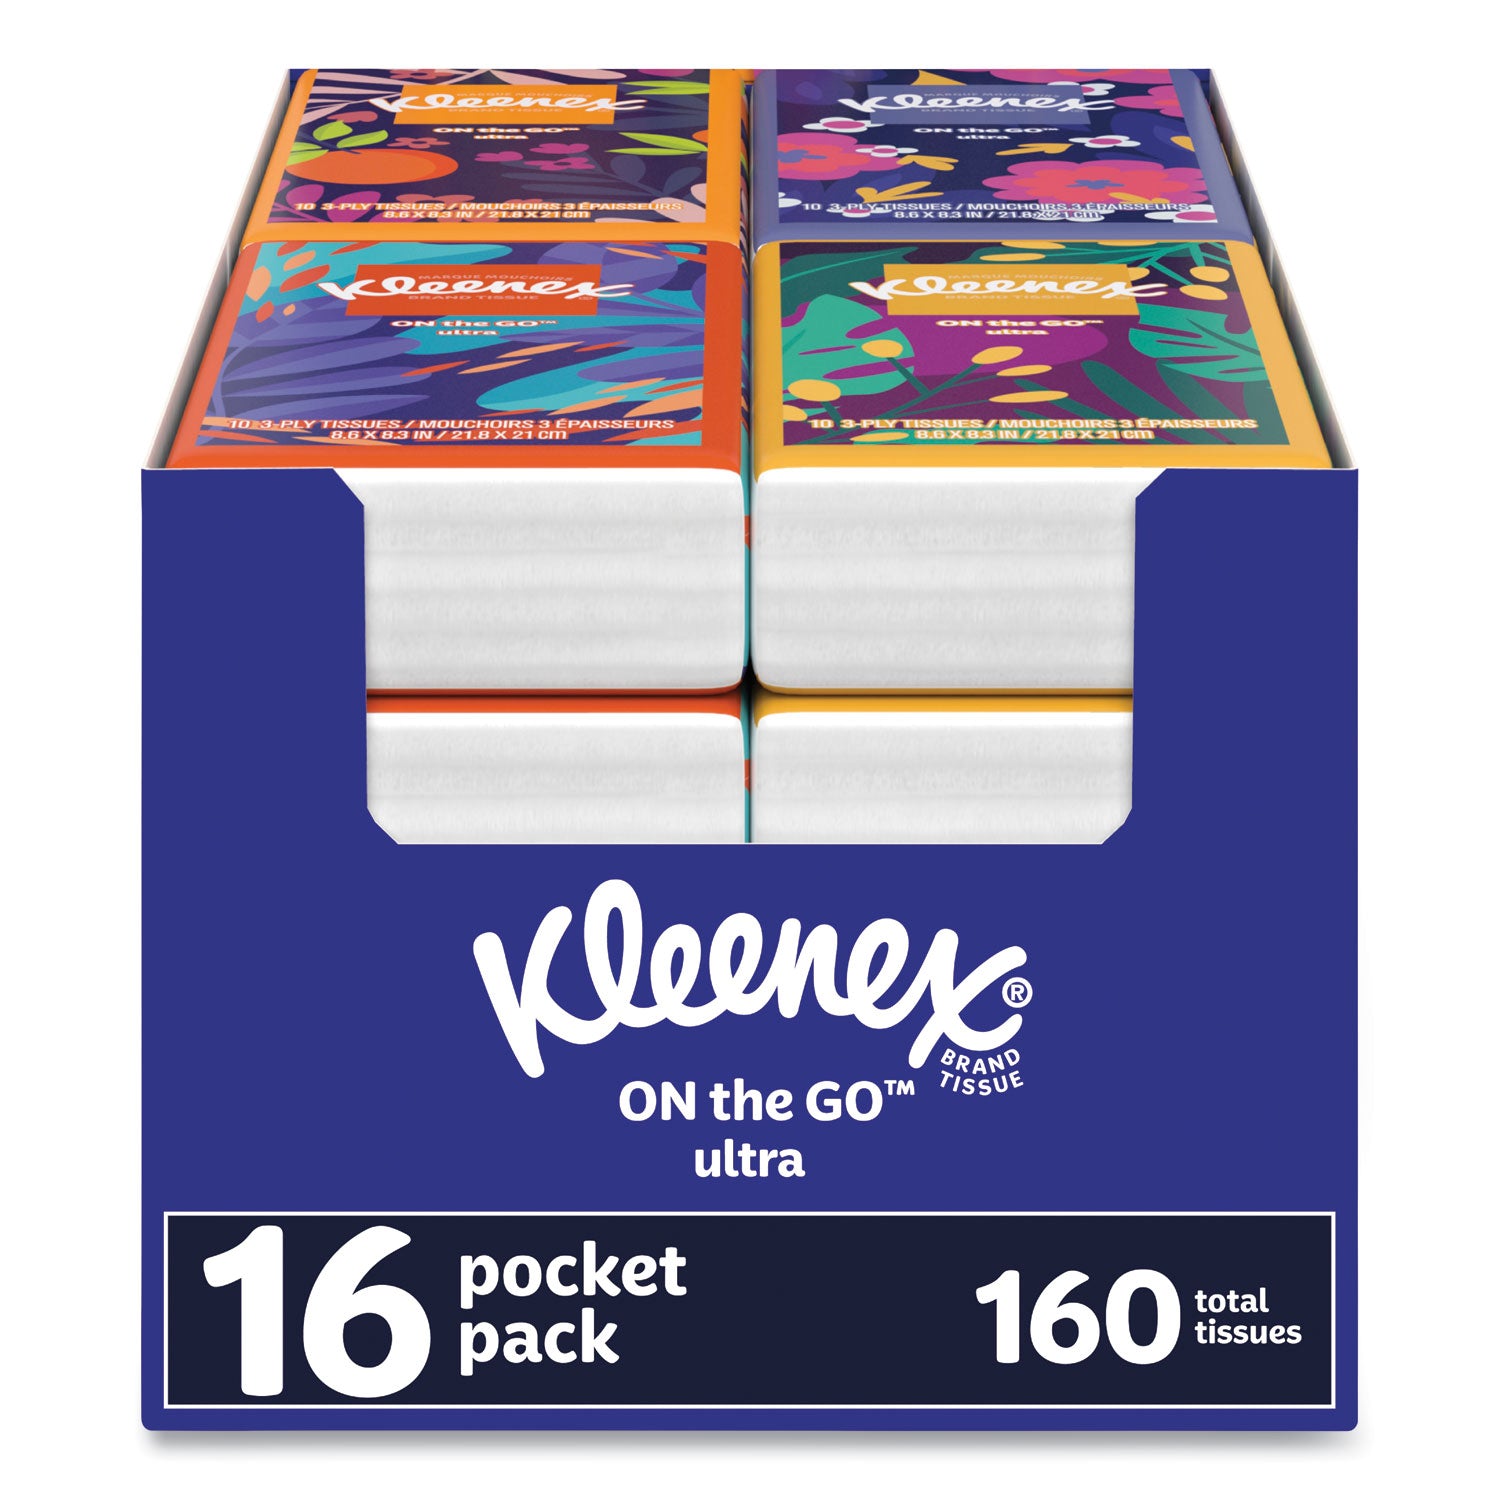 on-the-go-packs-facial-tissues-3-ply-white-10-pouch-16-pouches-pack-6-packs-carton_kcc54635 - 1